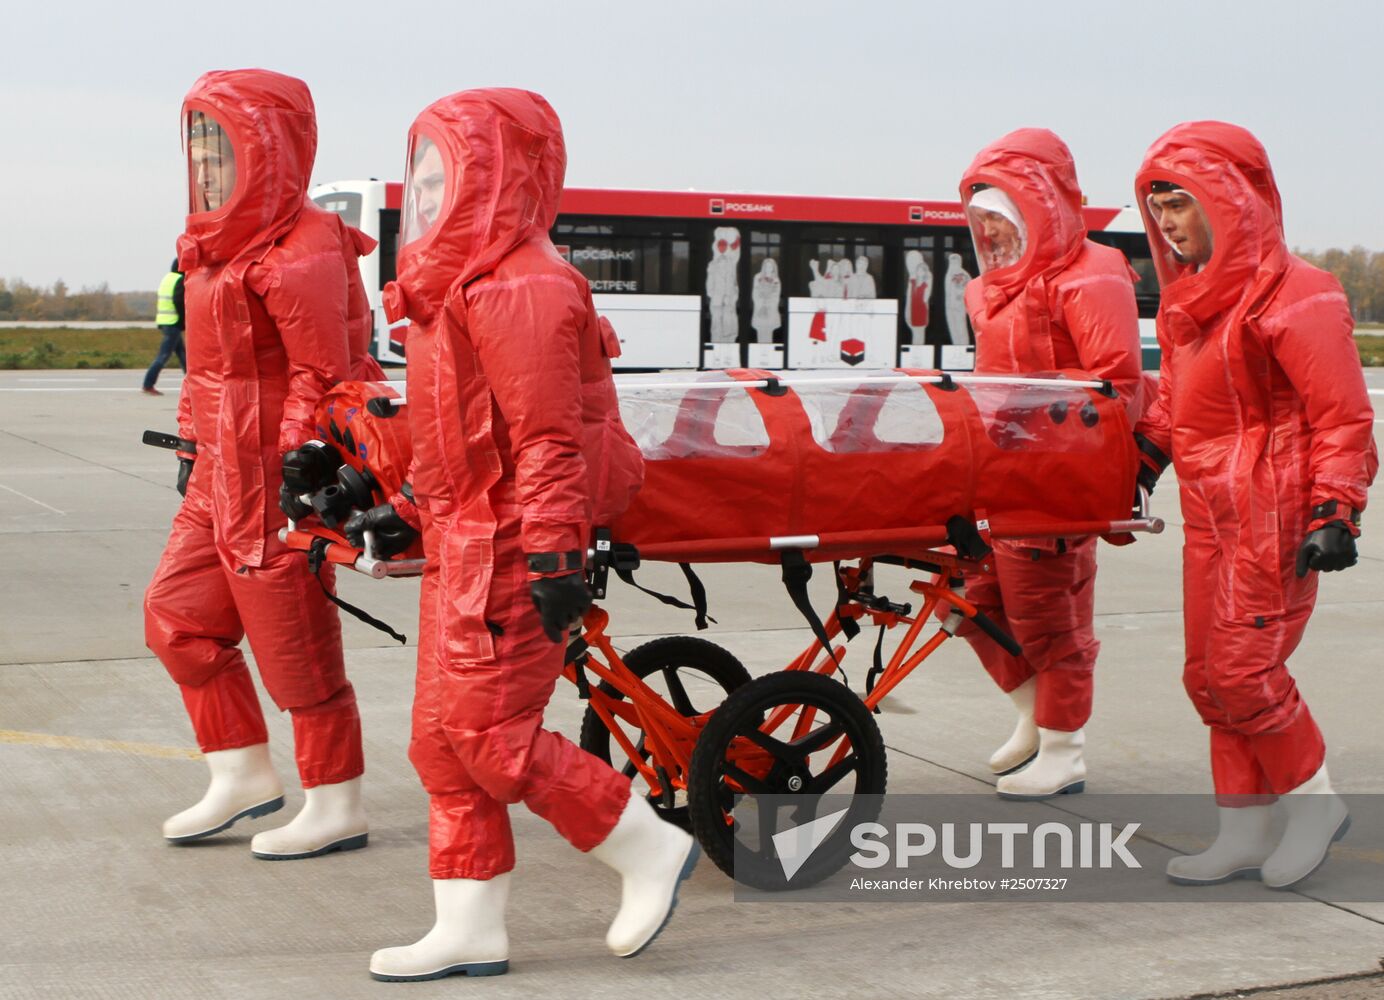 Presentation of aircraft equipped to transport Ebola patients